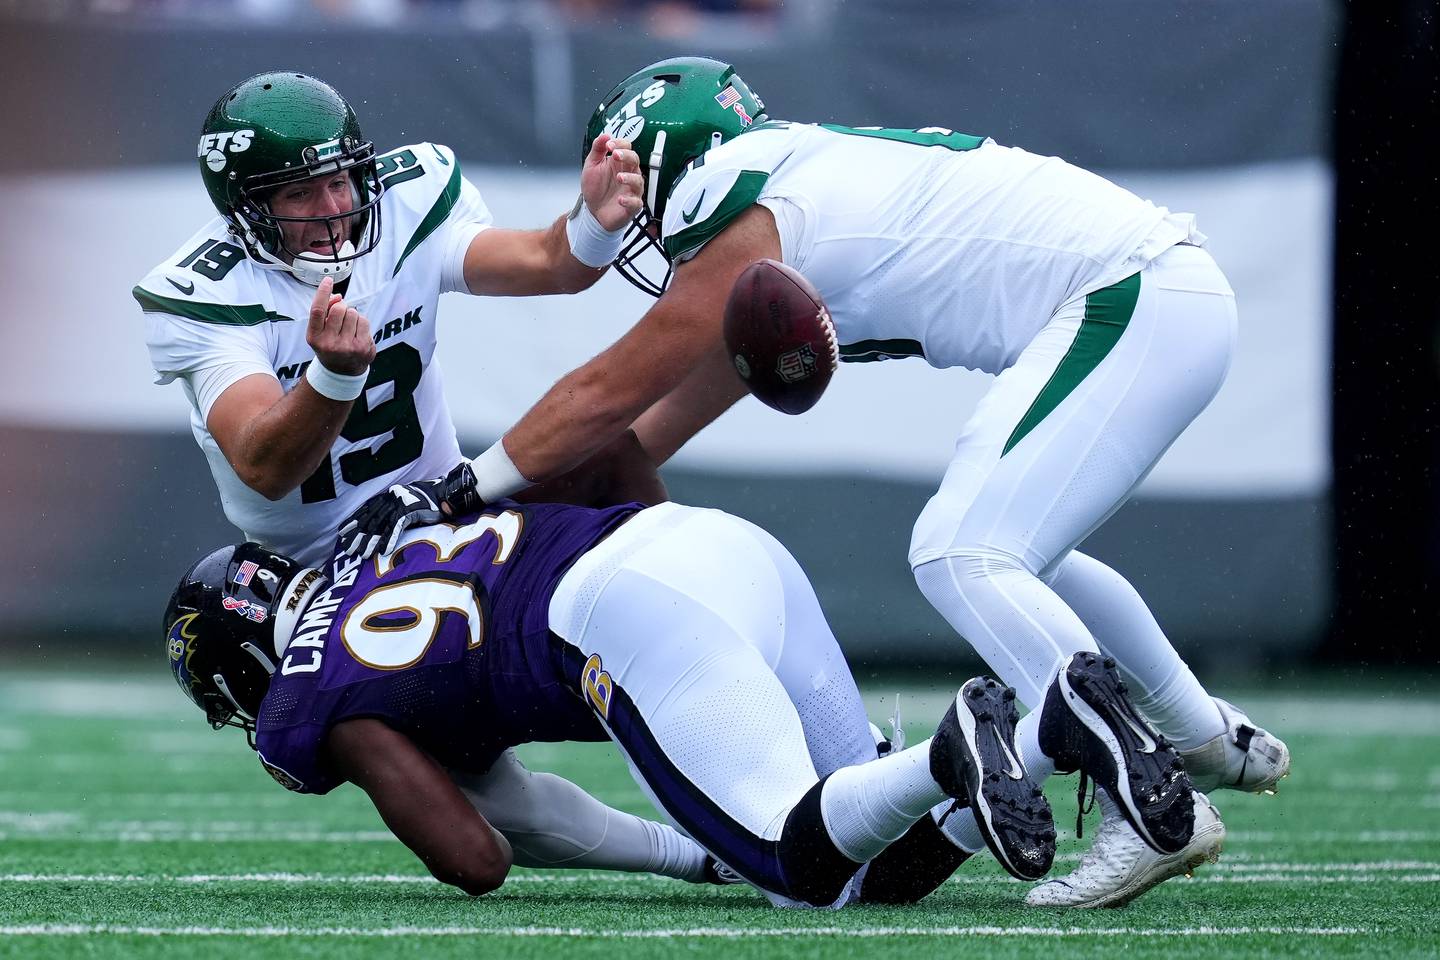 Joe Flacco #19 of the New York Jets called for intentional grounding after being pressured by Calais Campbell #93 of the Baltimore Ravens at MetLife Stadium on September 11, 2022 in East Rutherford, New Jersey.